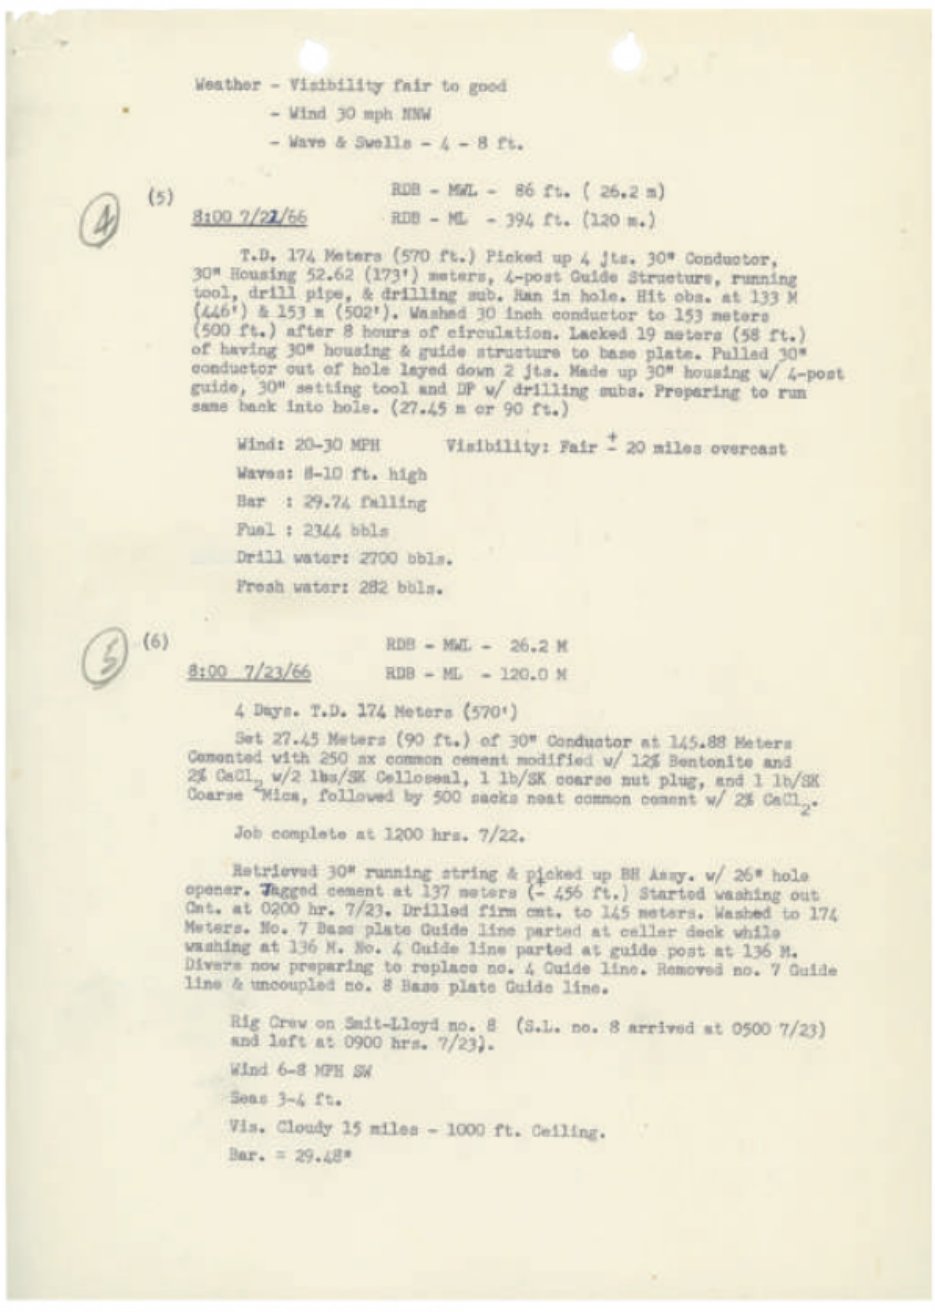 Regional State Archive of Stavanger, First oil drilling on the Norwegian shelf, Morning Reports - page 2, July 1966